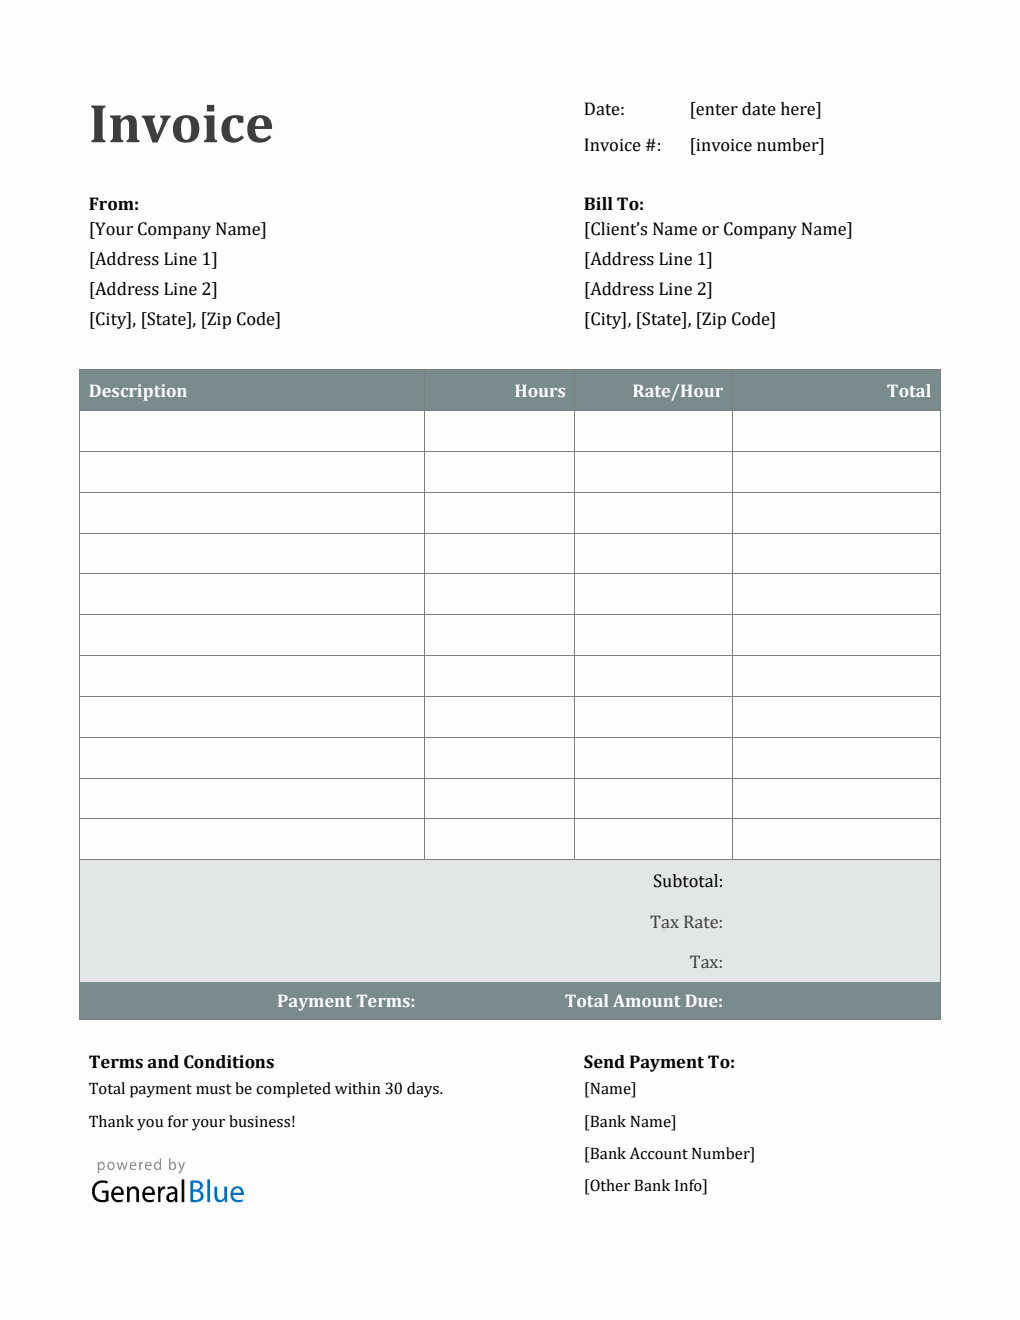 Word Invoice Template for U.S. Freelancers With Tax (Ion)